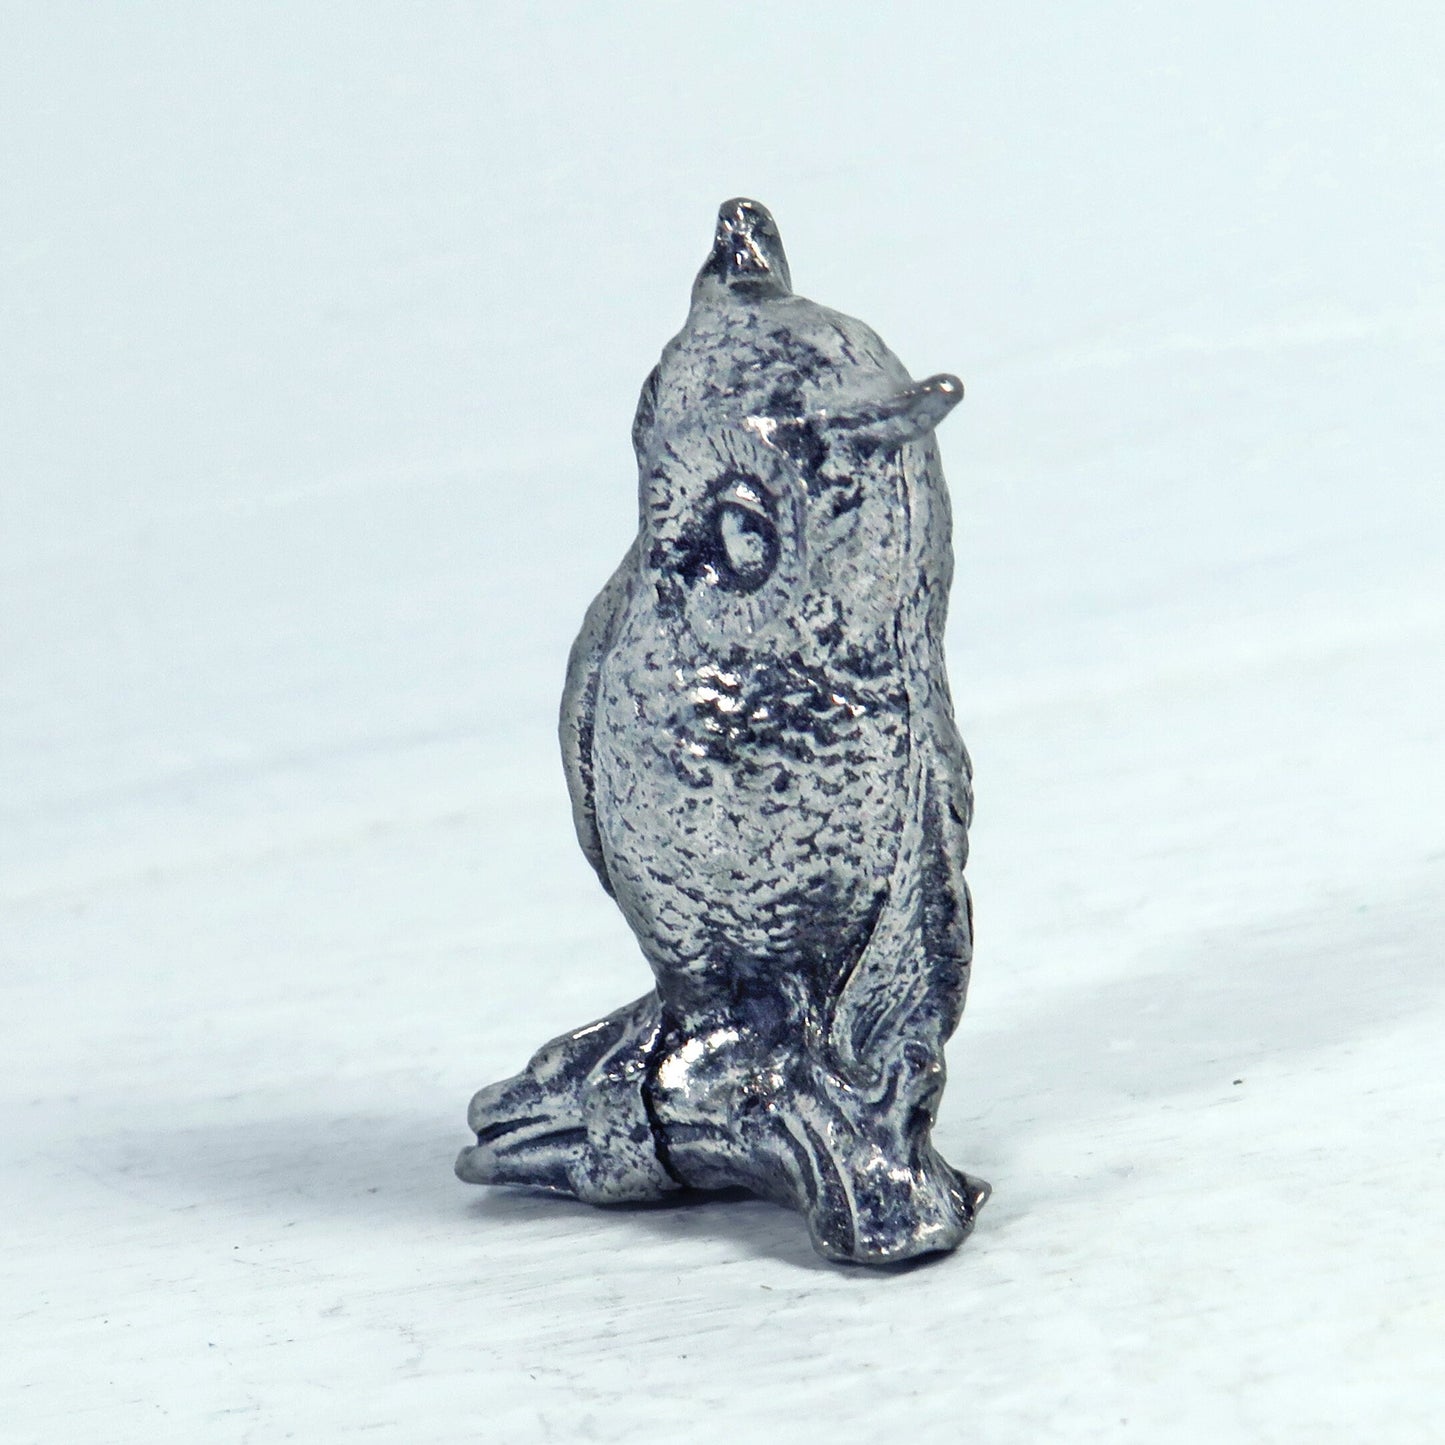 Miniature Vintage Owl Figurine / Woodland Decor / Small Pewter Owl Statue  Sitting on Branch / Tiny Owl Decor / Owl Lover Gift / Owl Present